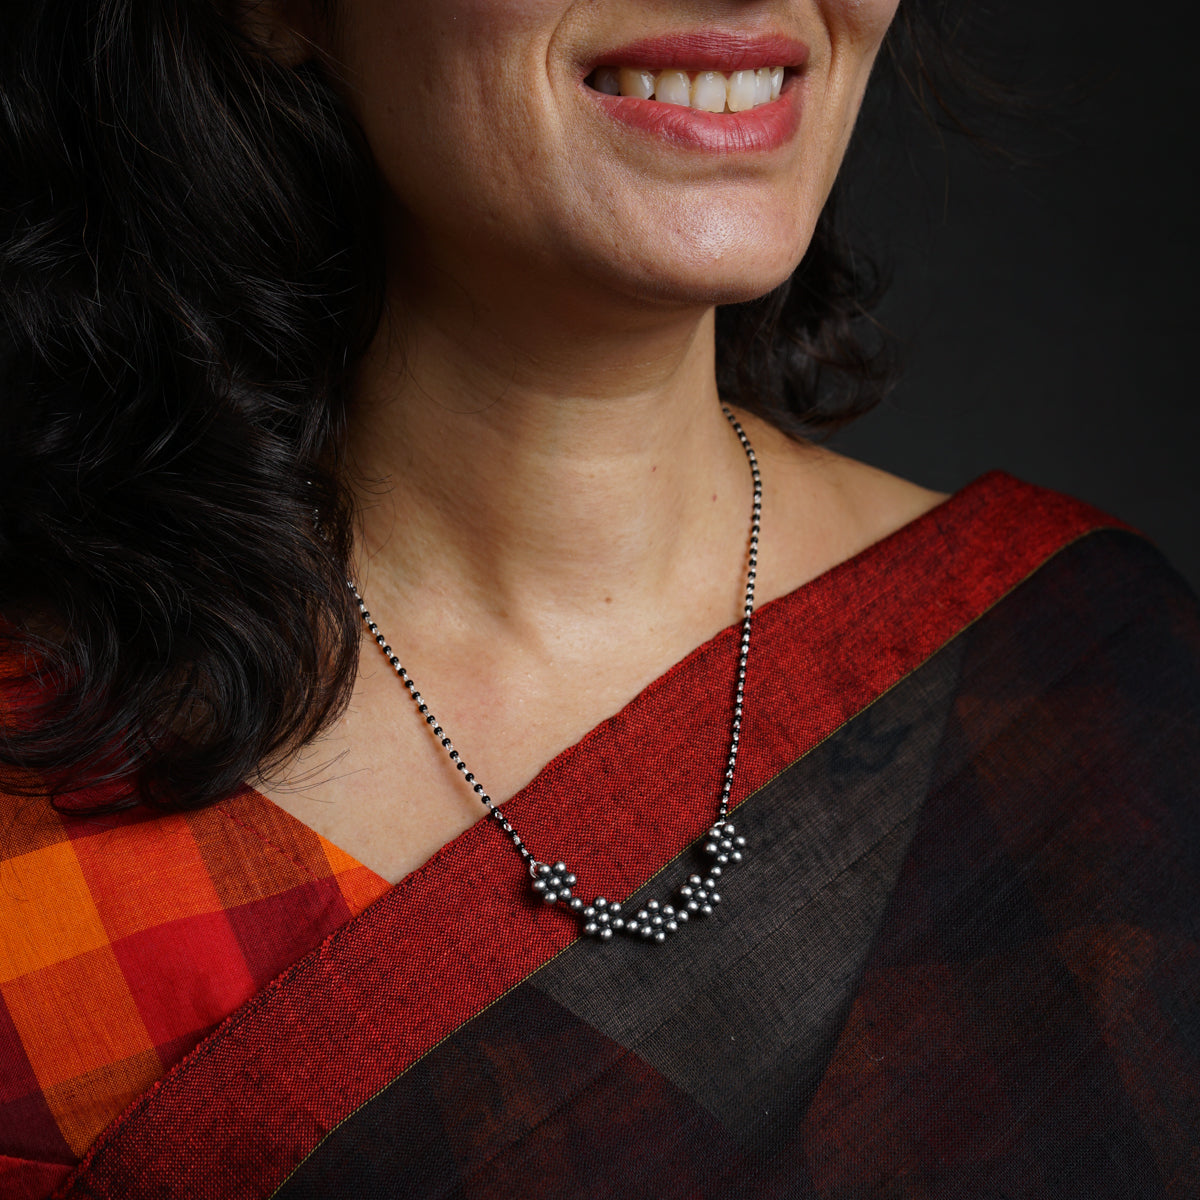 a woman wearing a red and black sari